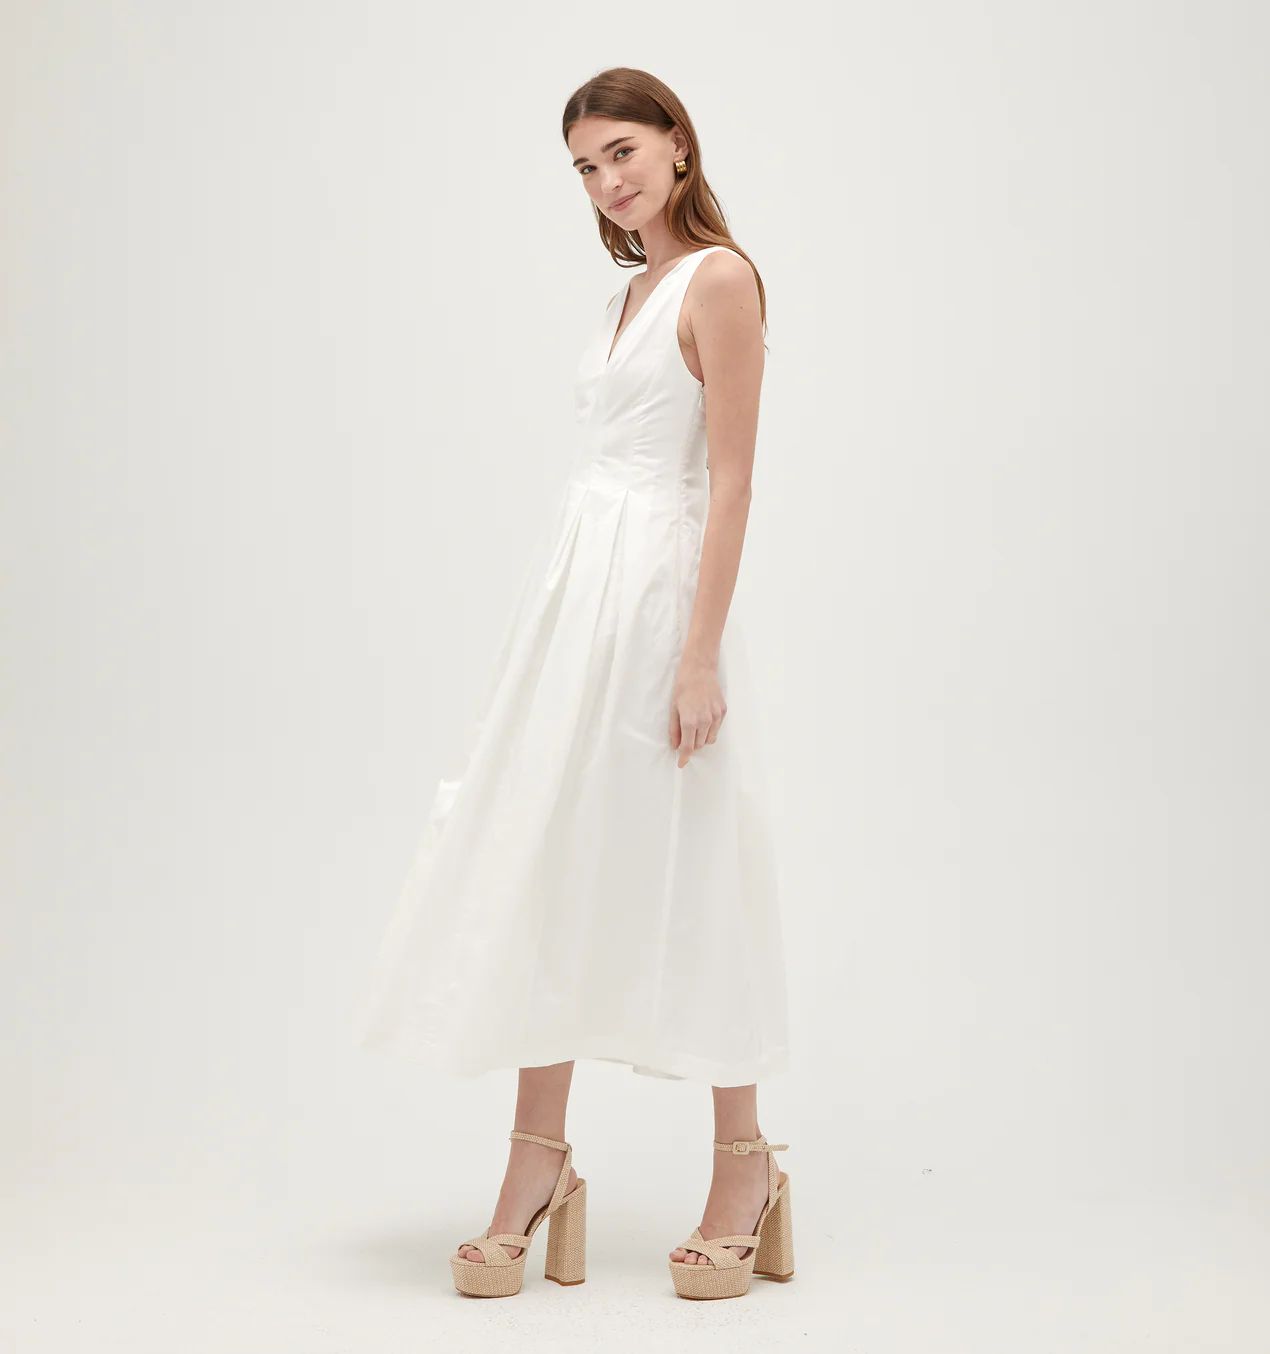 The Jacqueline Dress - White Cotton Sateen | Hill House Home